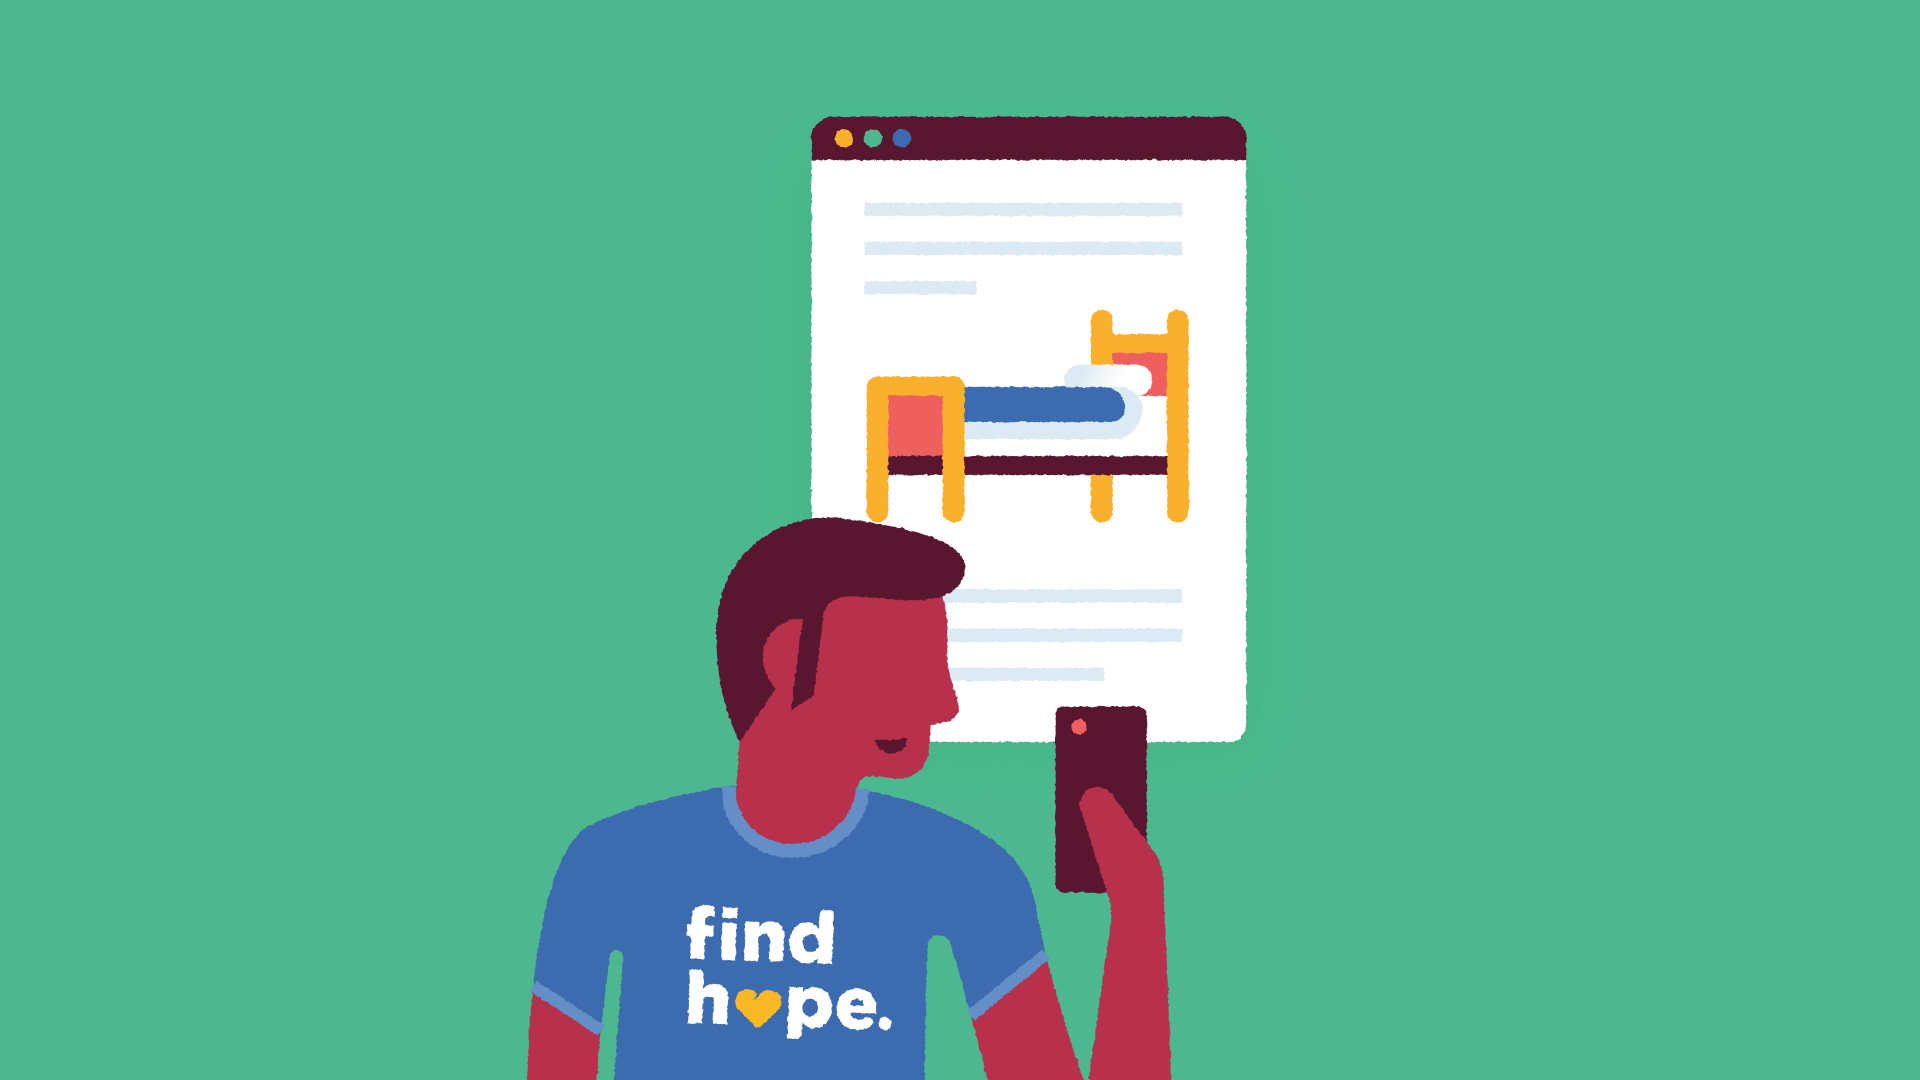 CarePortal: Helping families in crisis find hope